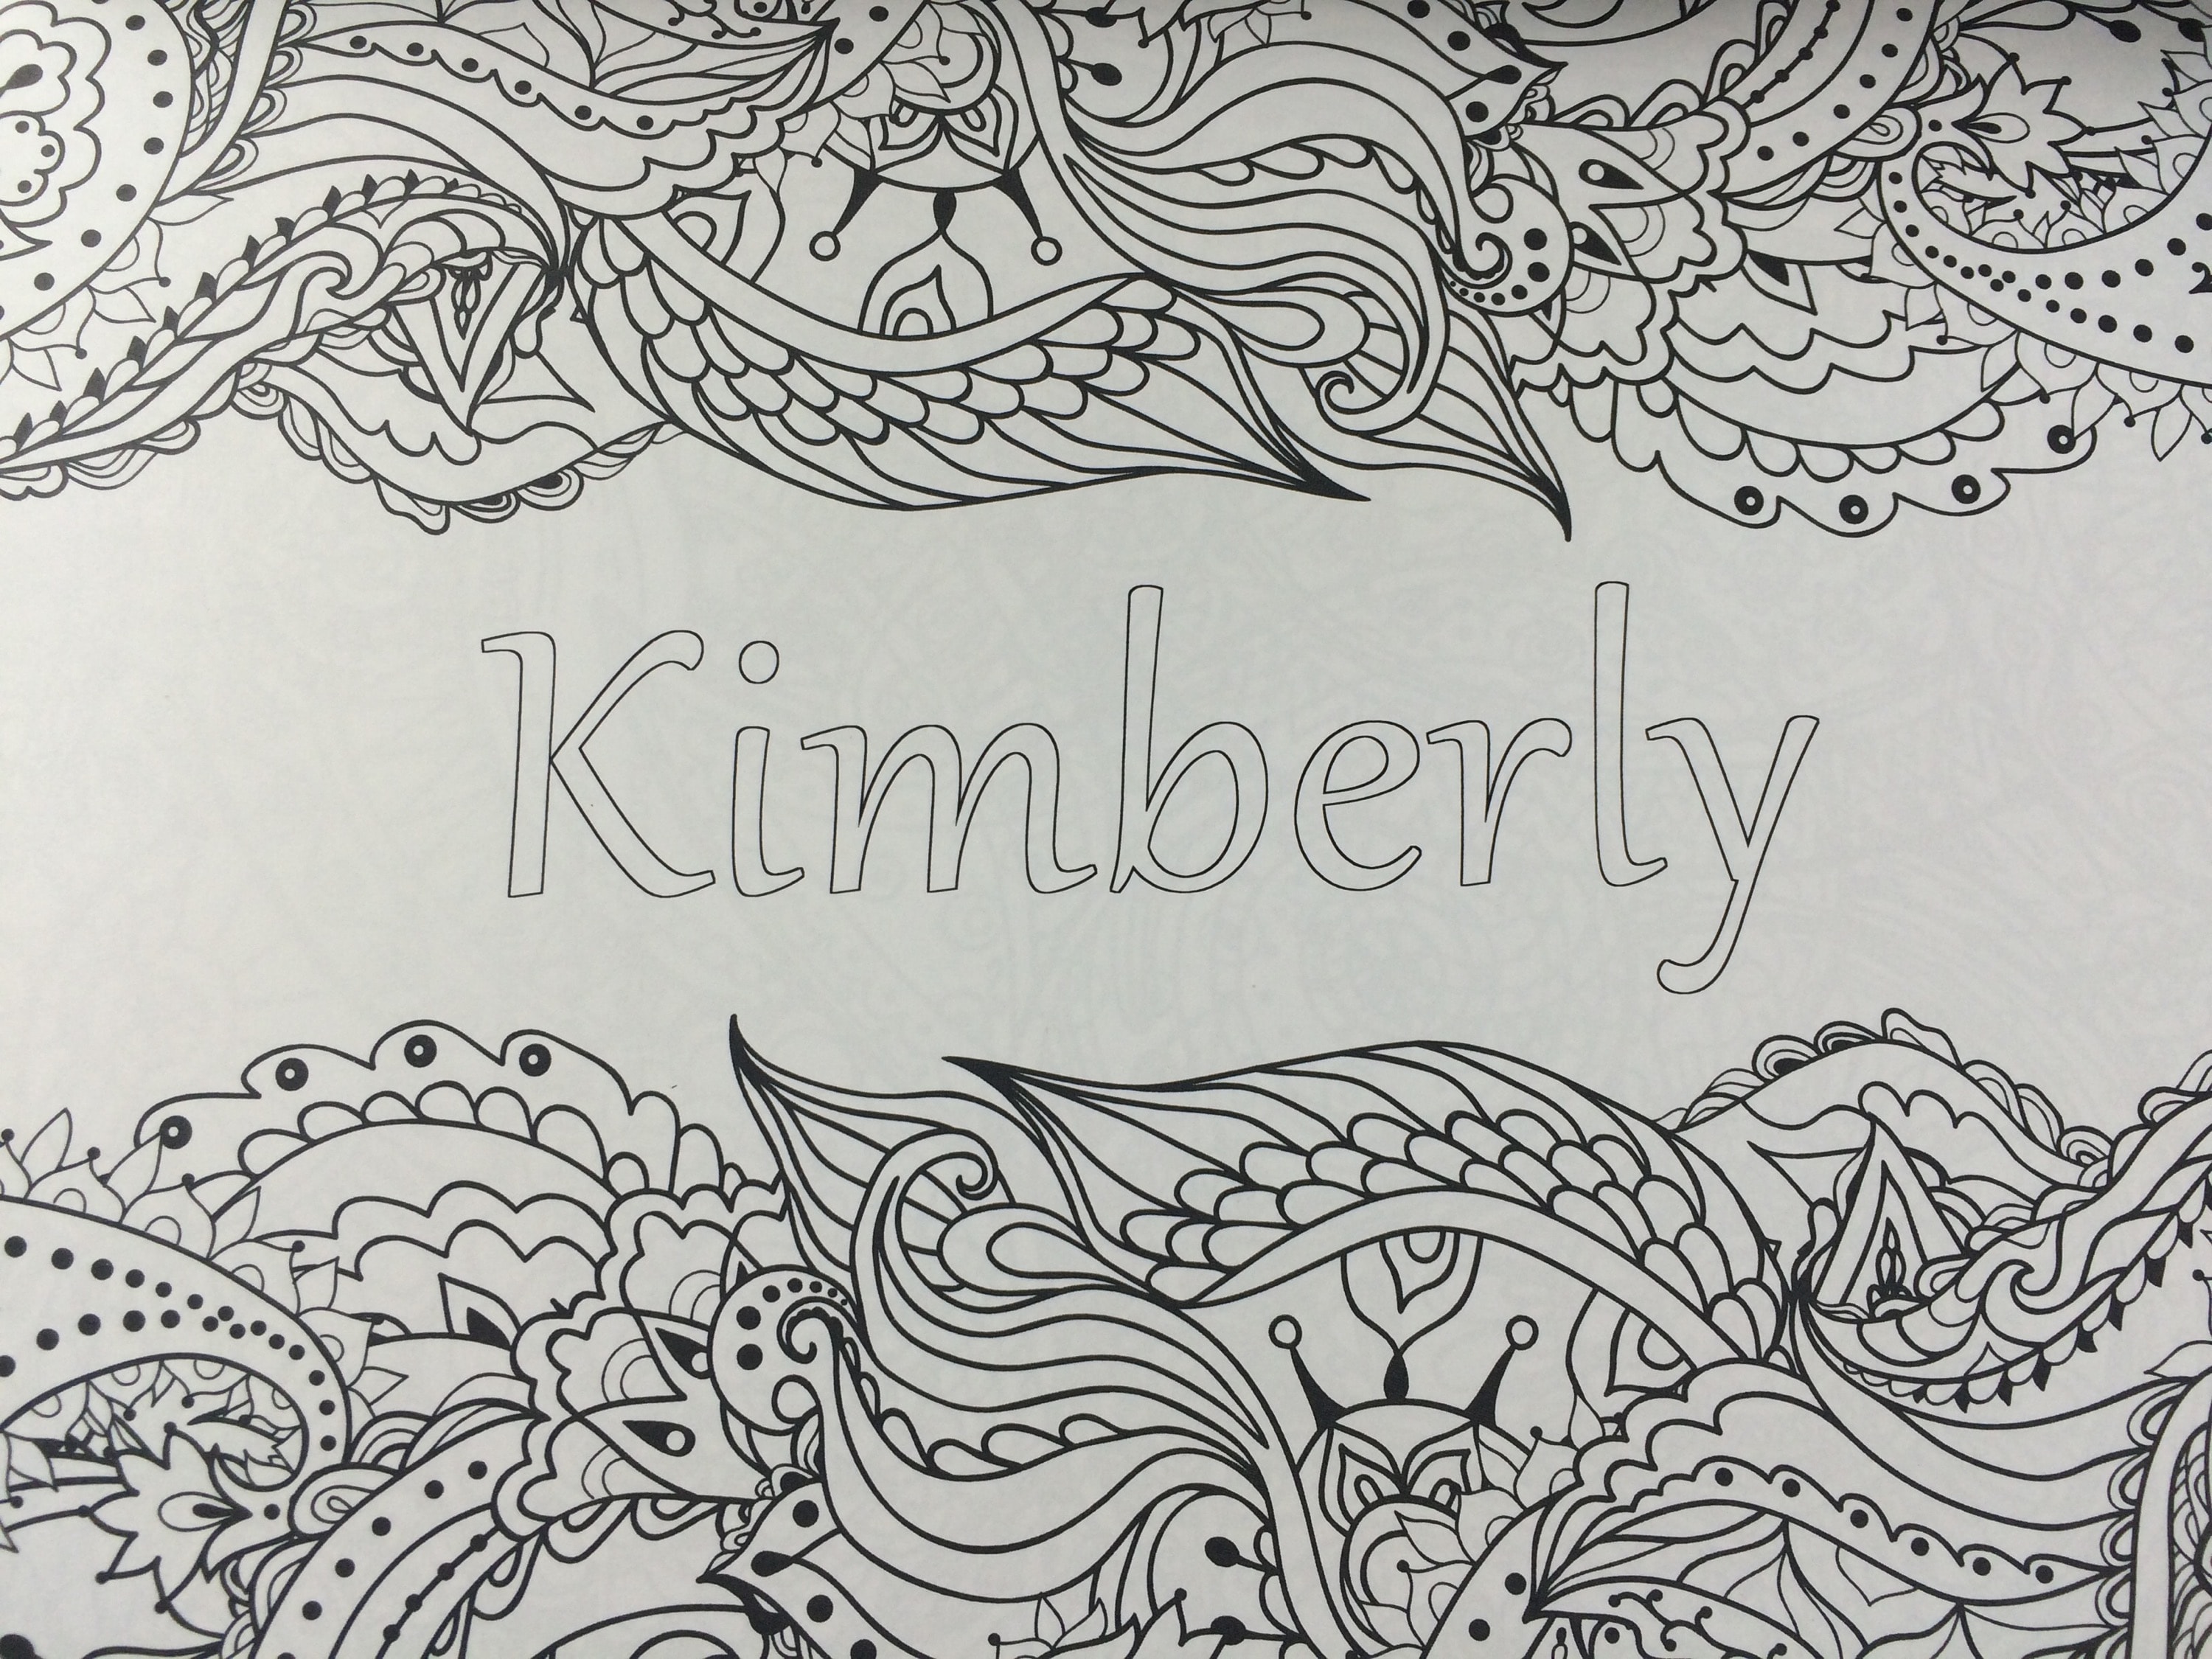 Personalized Adult Coloring Books From Put Me In The Story HD Wallpapers Download Free Images Wallpaper [wallpaper896.blogspot.com]